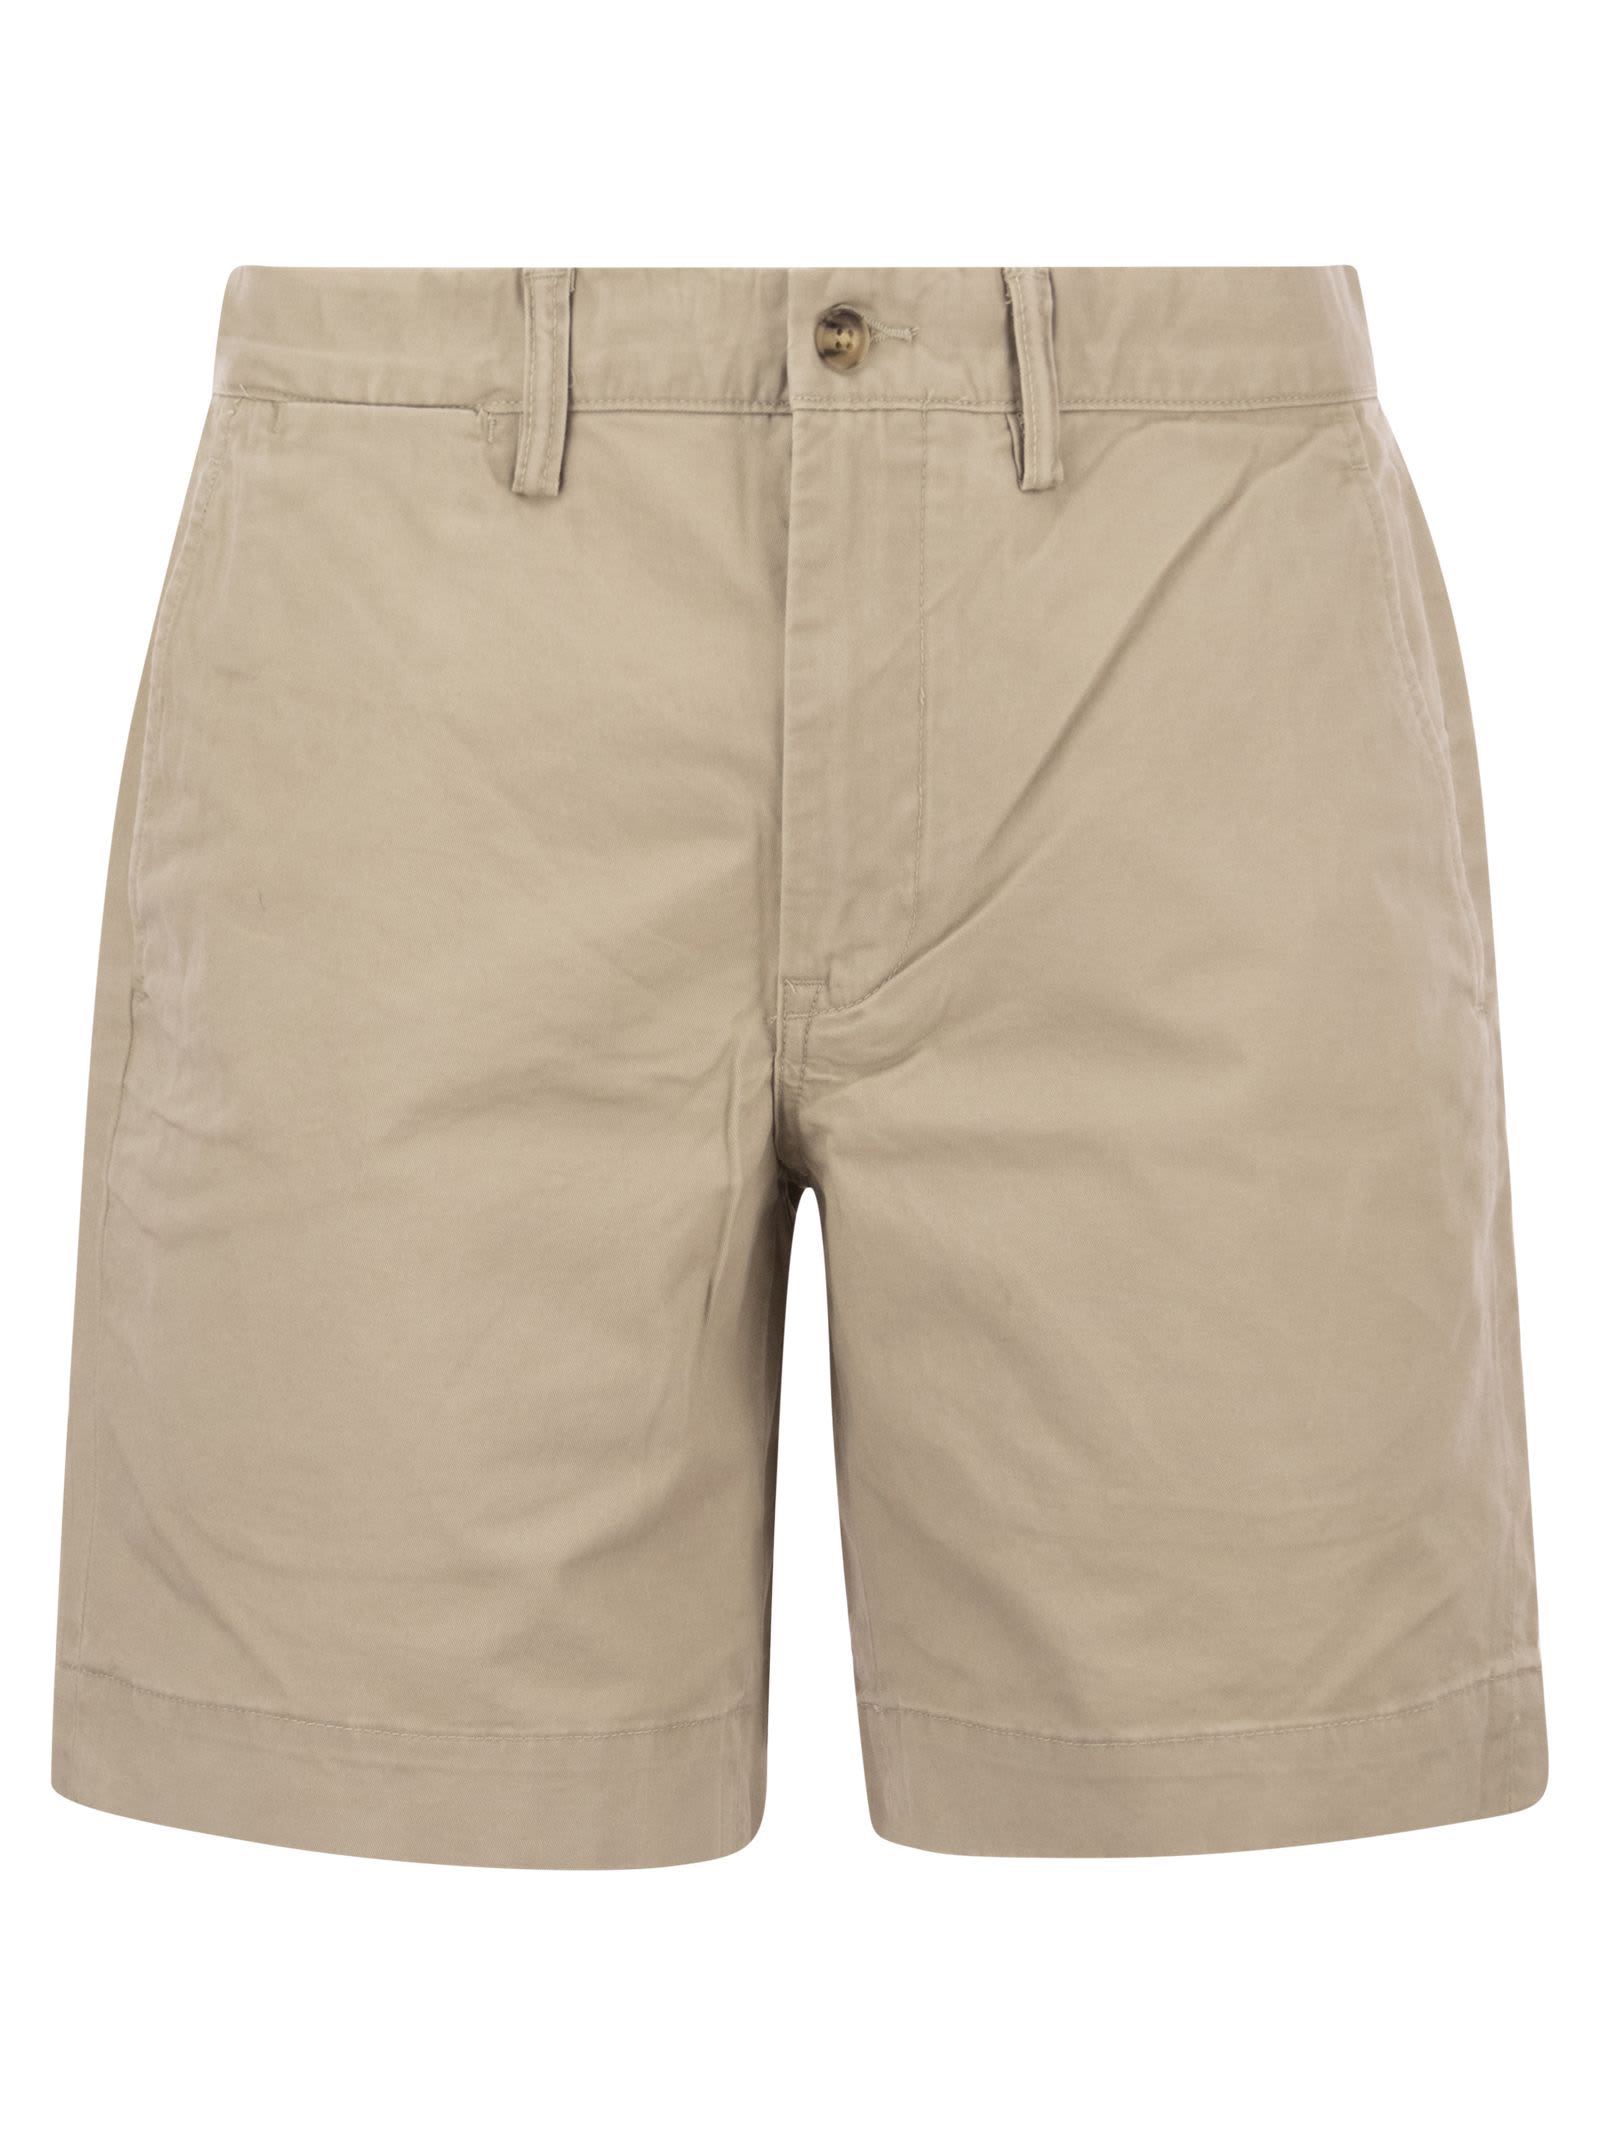 Polo Ralph Lauren 9.5-inch Stretch Cotton Classic Fit Chino Shorts